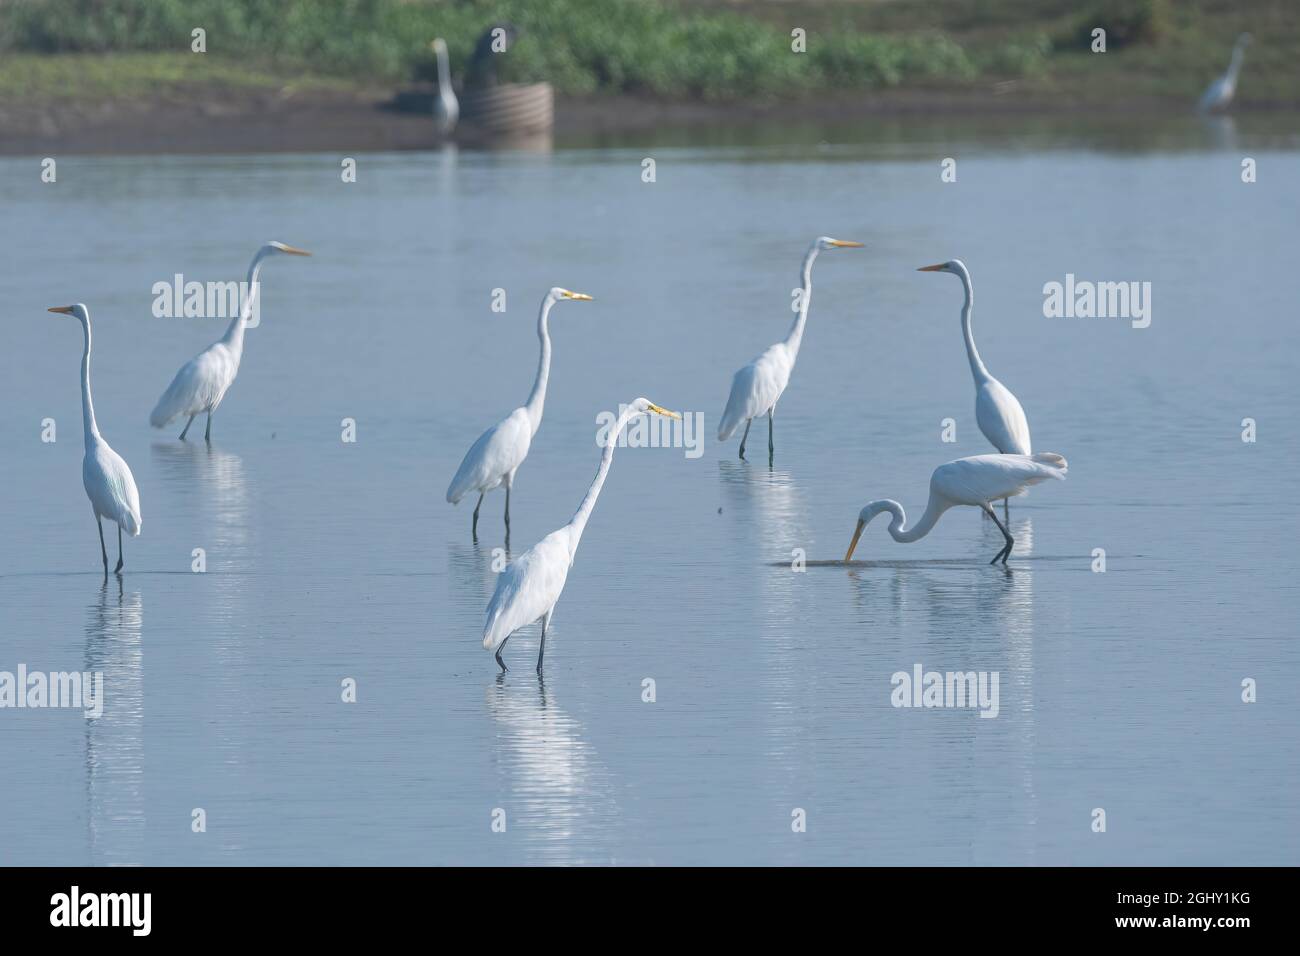 A small flock of Great White Egrets wading in the shallow part of a lake near a shoreline as they hunt for food in the water on a sunny morning. Stock Photo